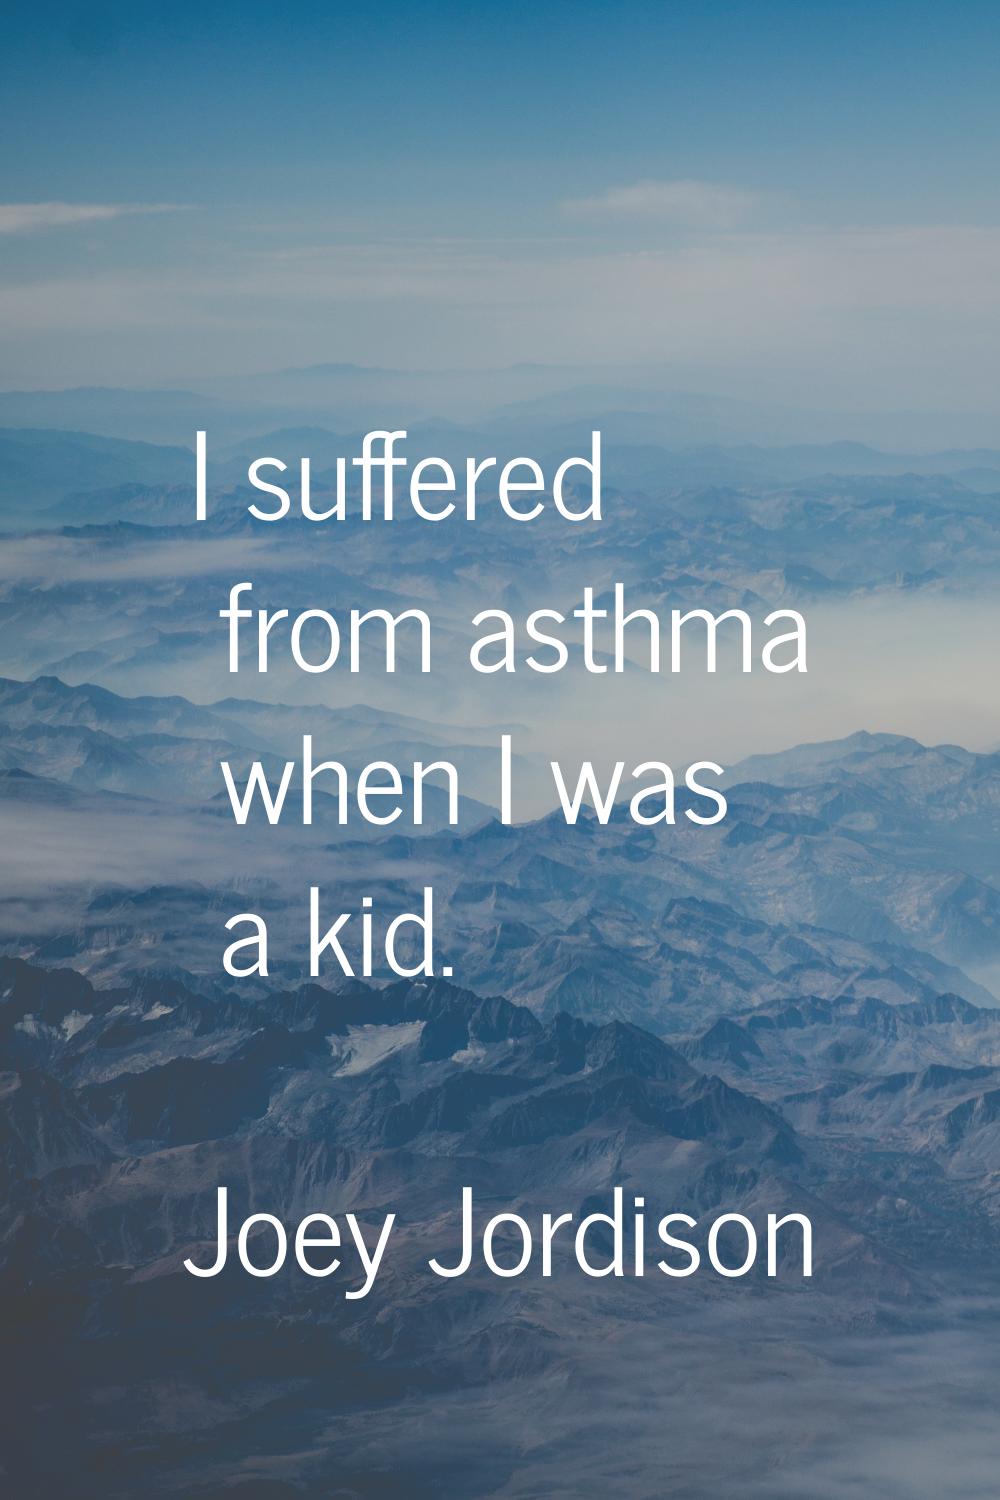 I suffered from asthma when I was a kid.